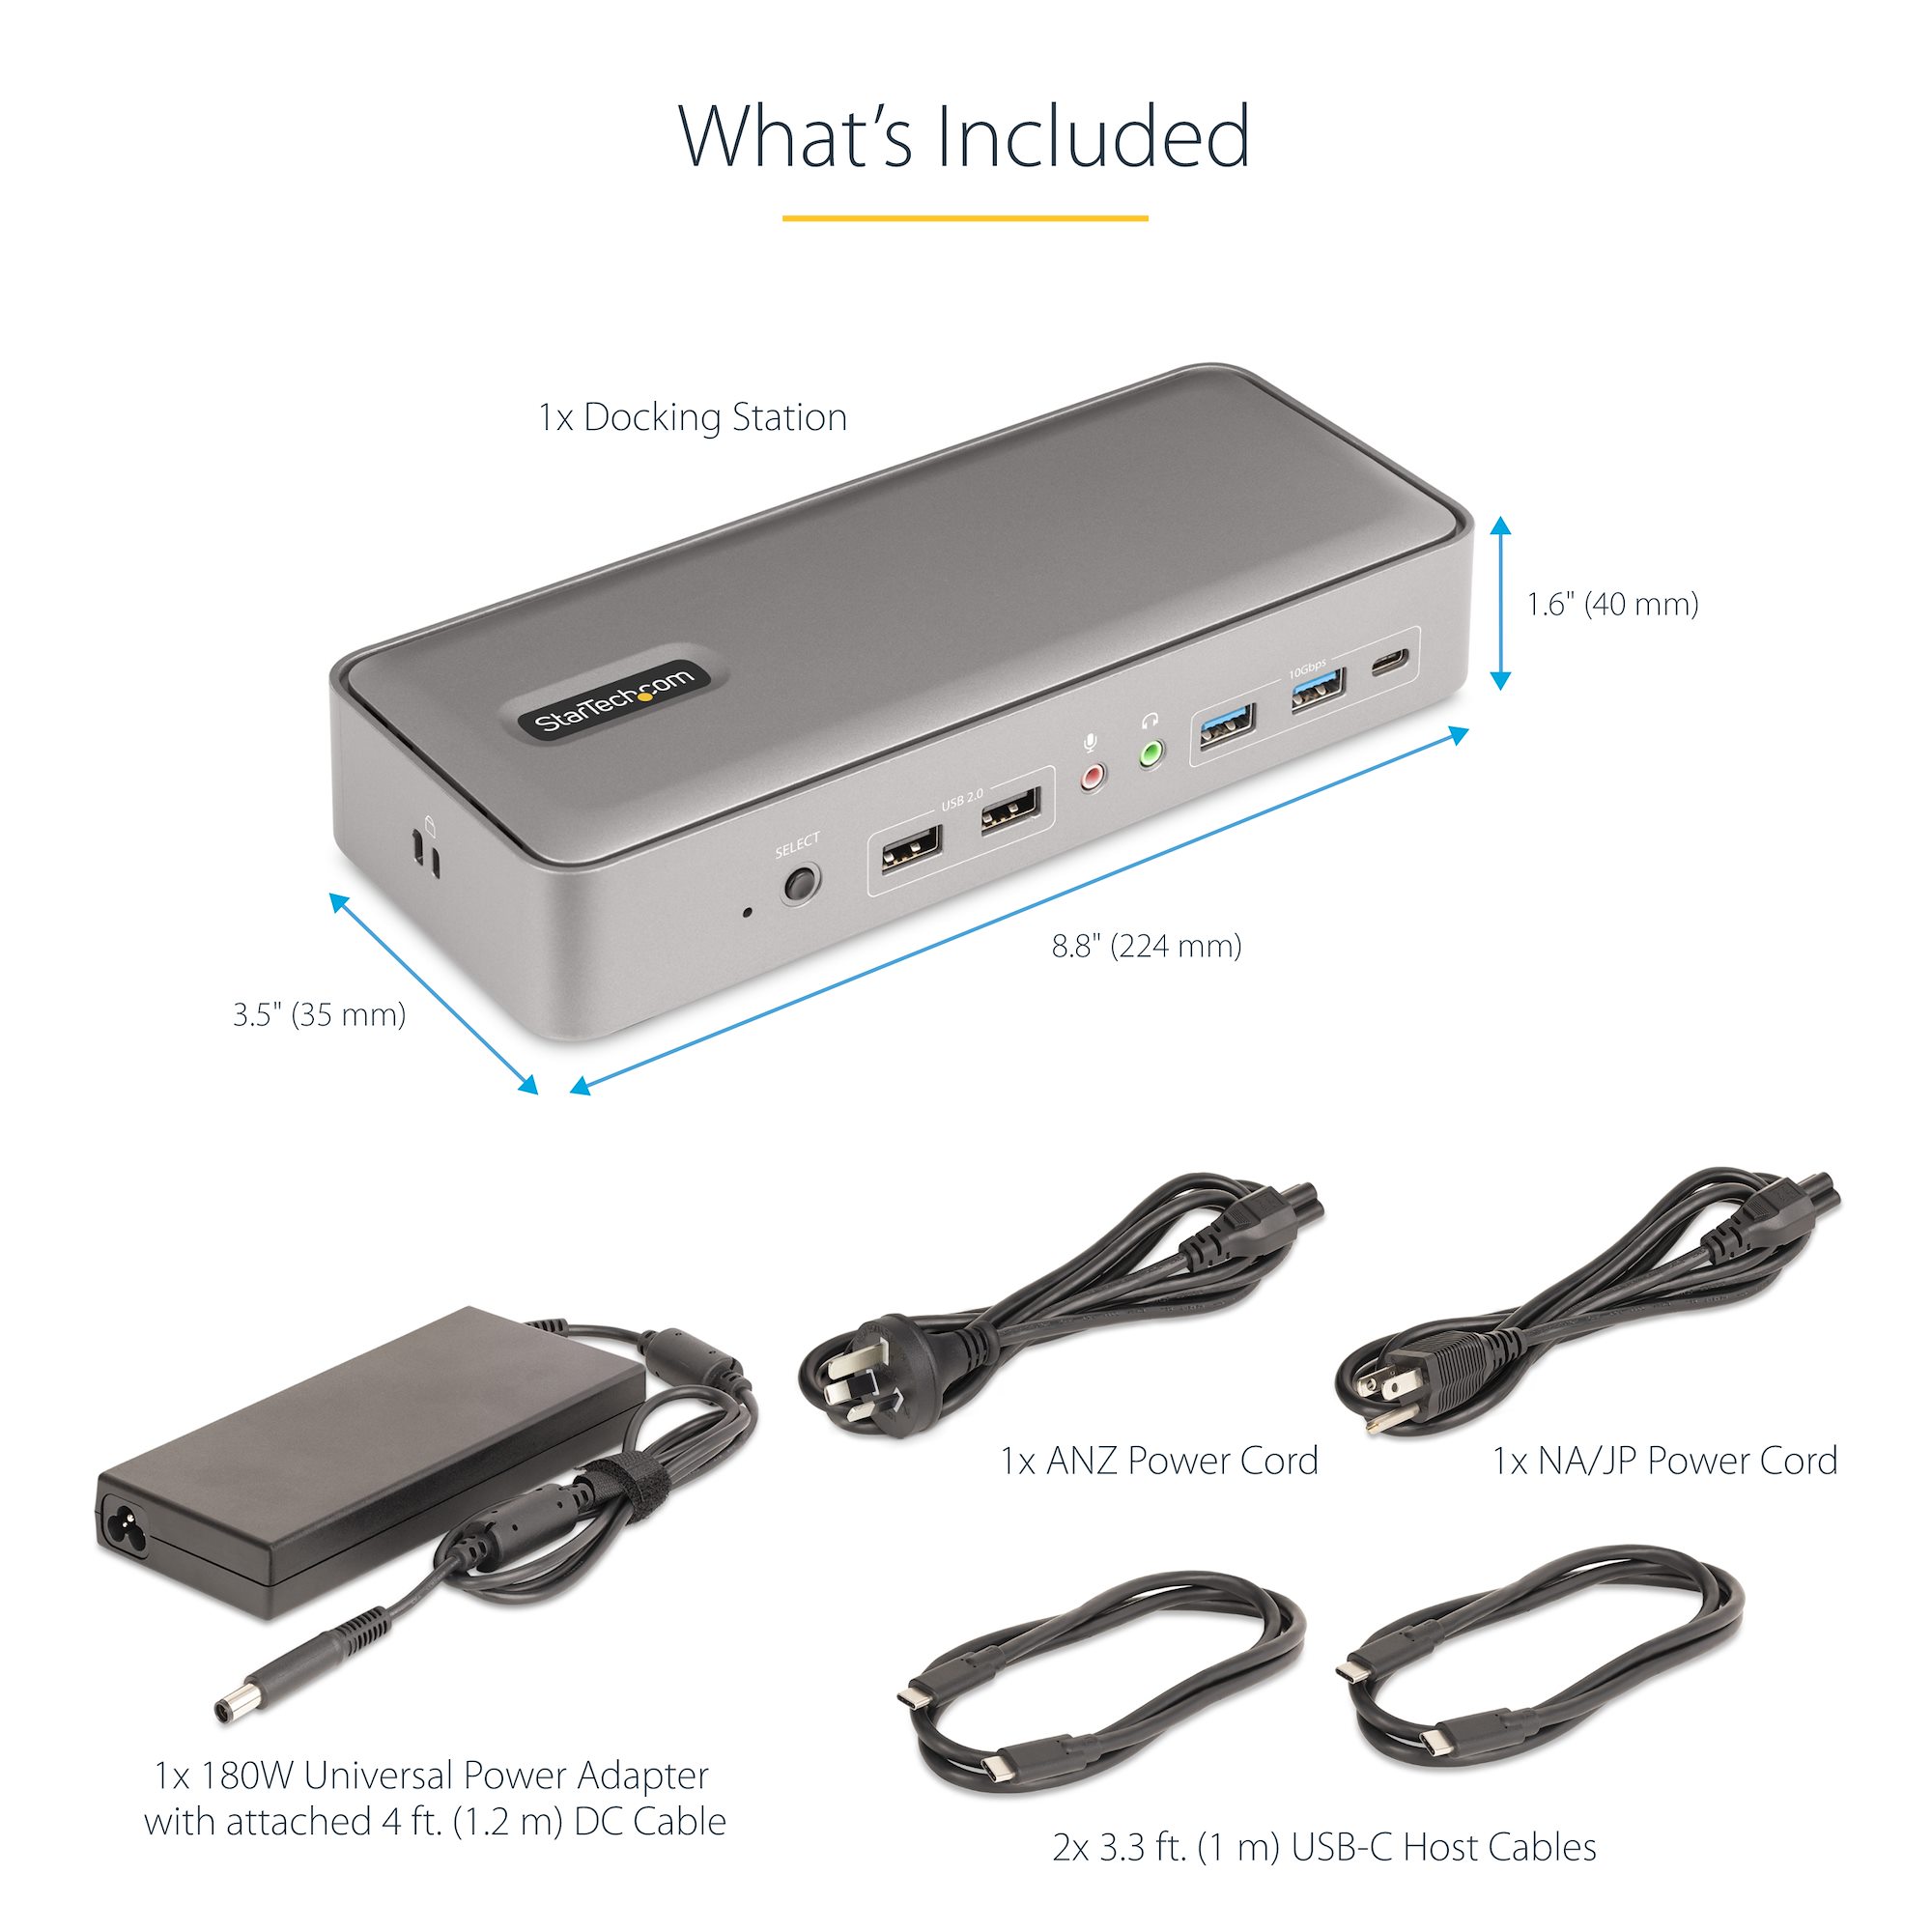 Anker KVM USB-C Docking Station debuts with launch discount